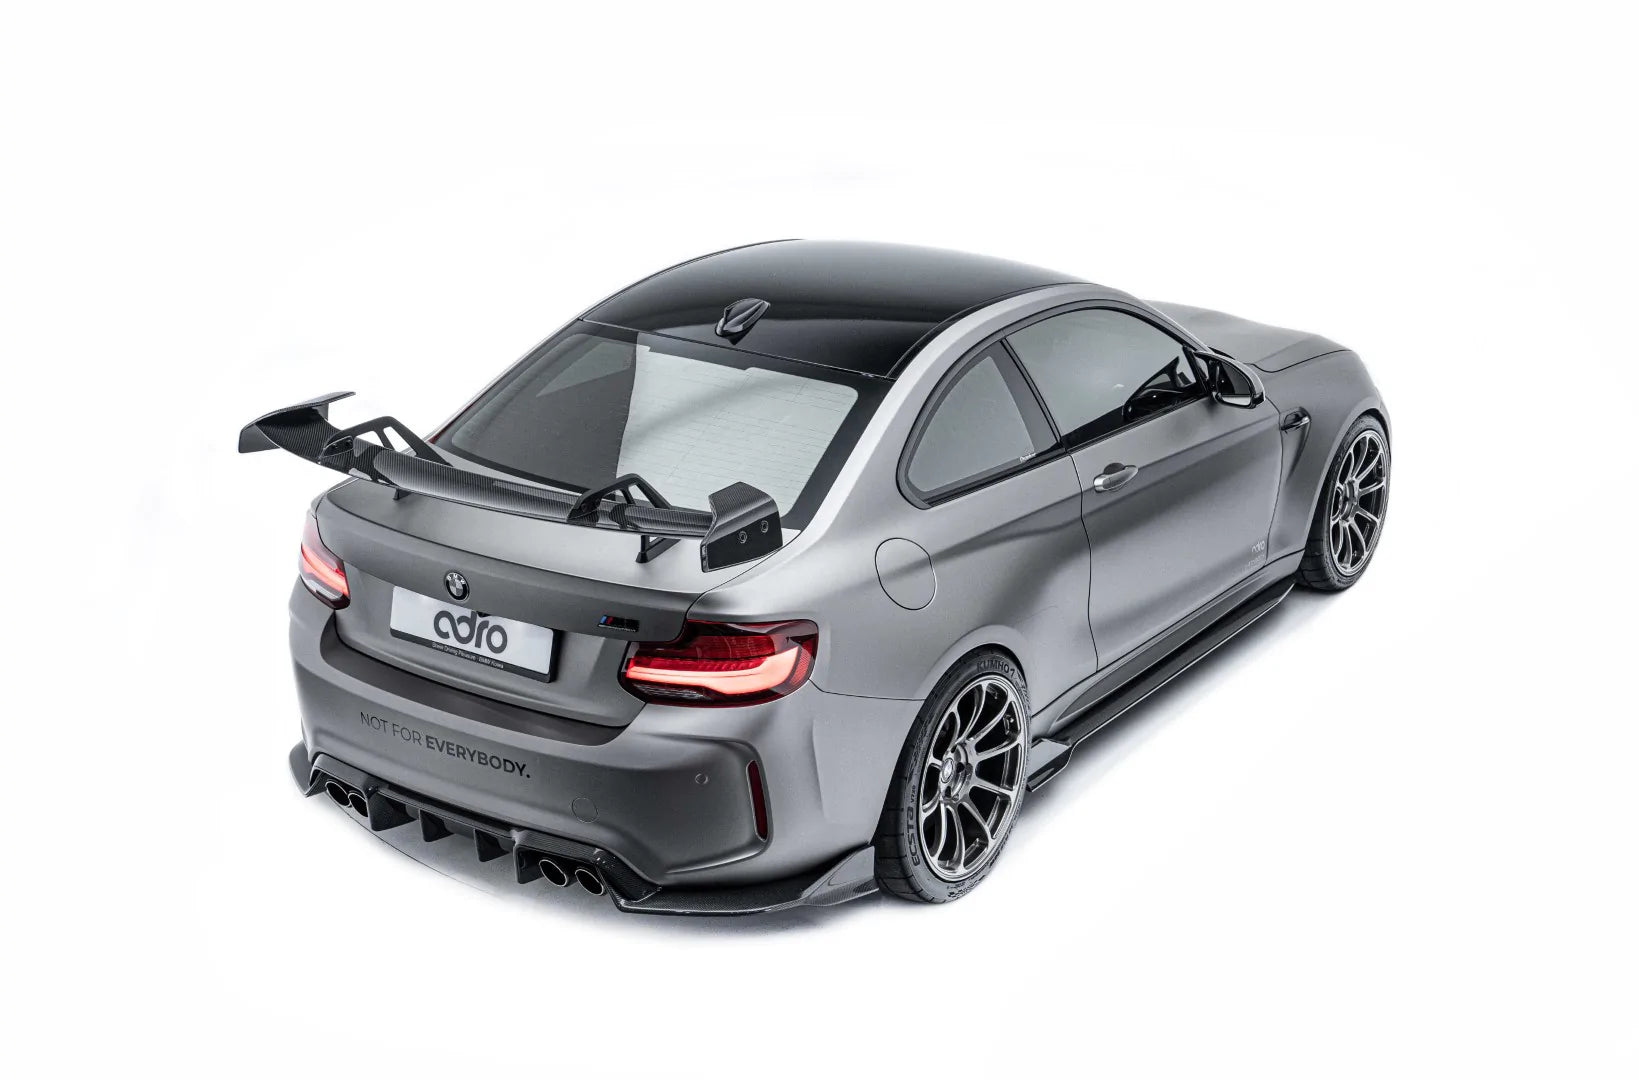 BMW M2 Competition F87 Pre-Preg Carbon Fibre Side Skirts by Adro (2018-2021), Side Skirts & Winglets, Adro - AUTOID | Premium Automotive Accessories